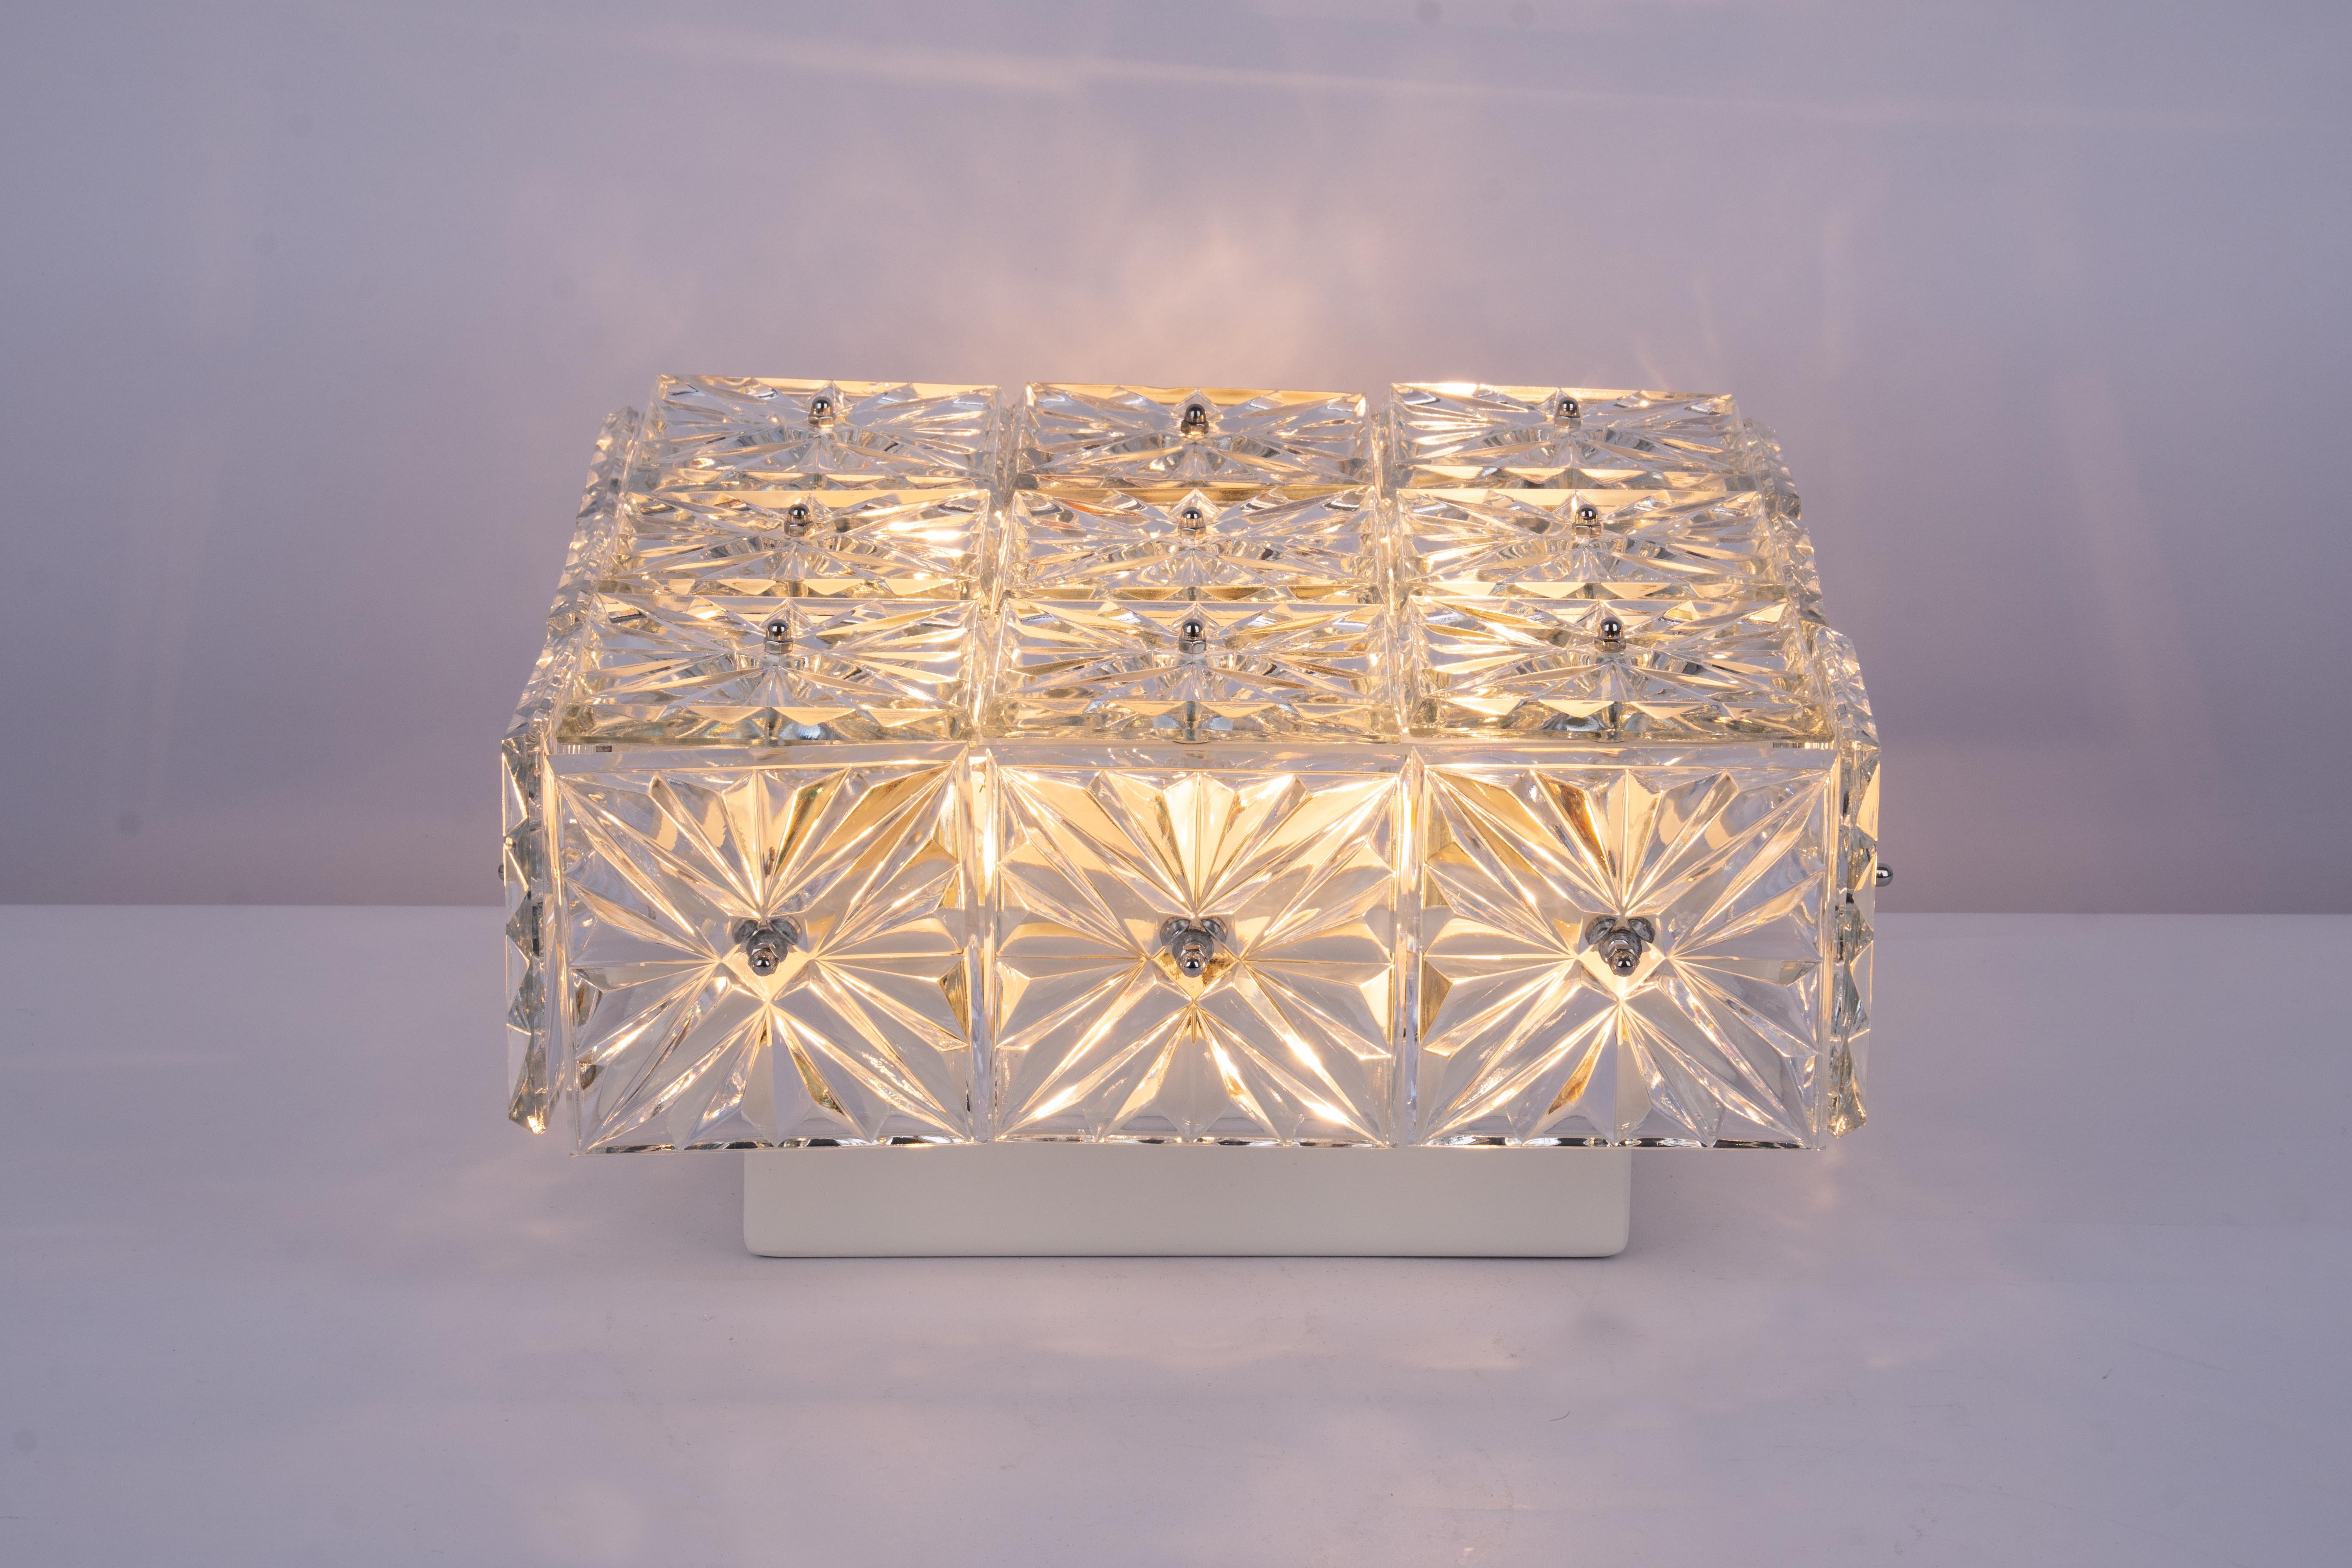 1 of 4 Large Flushmount Faceted Crystal Light Fixture, Germany, 1960s For Sale 2